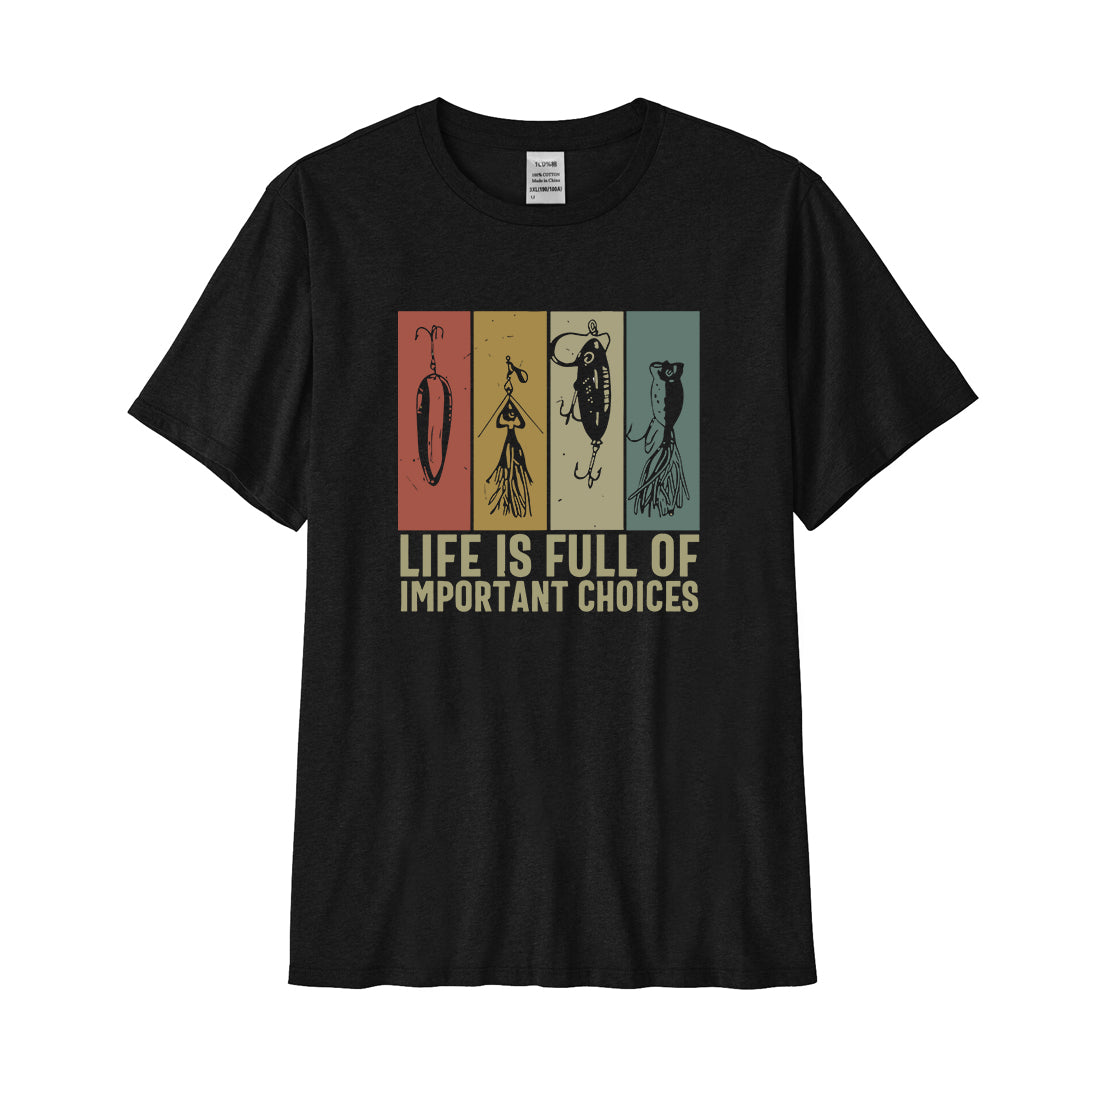 LIFE IS FULL OF IMPORTANT CHOICES Performance T-Shirt